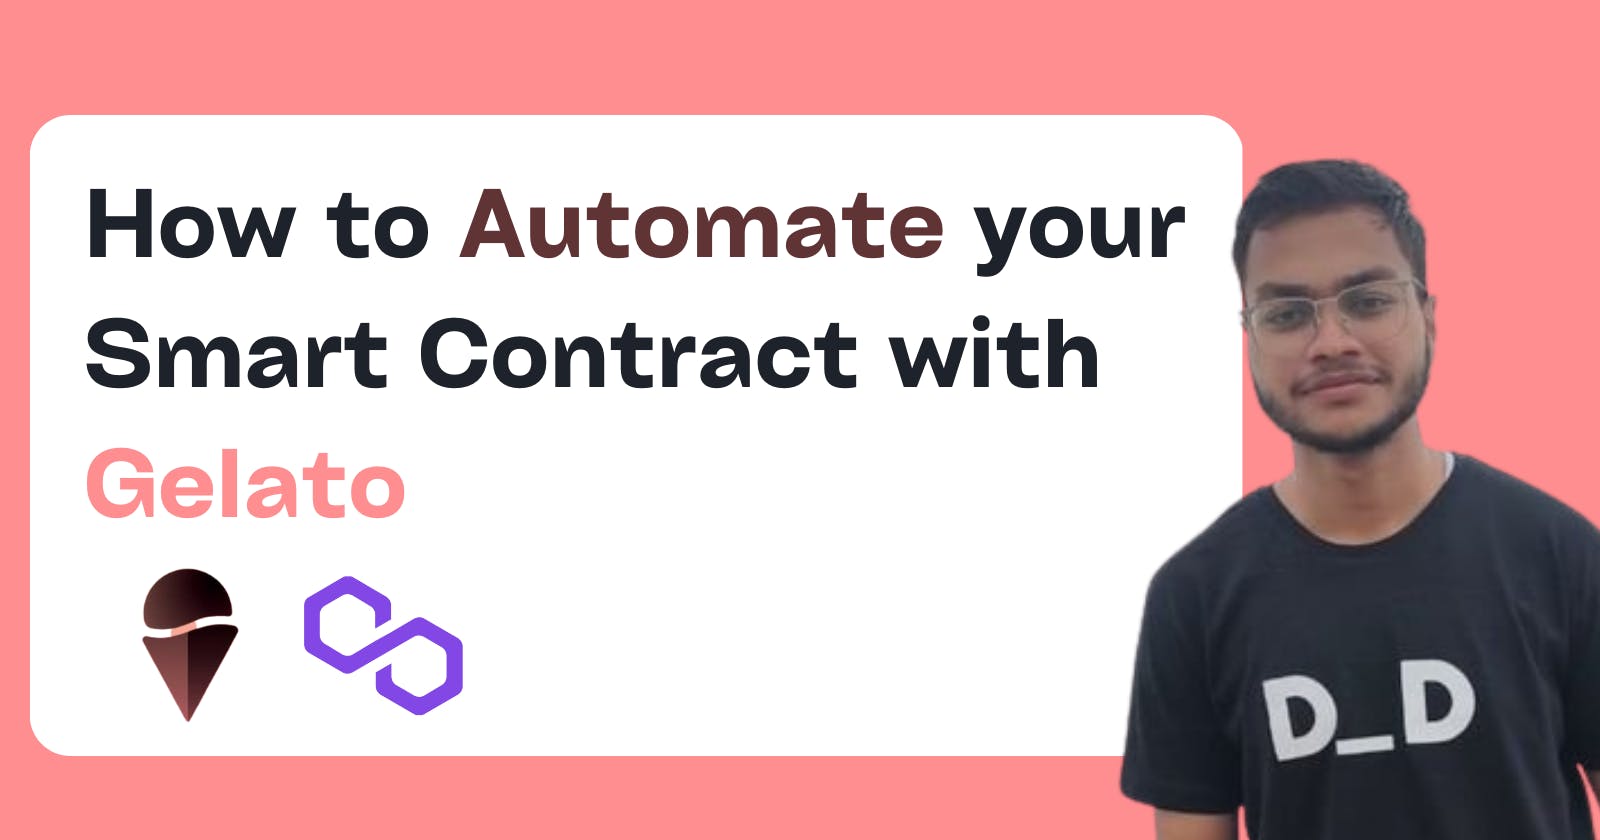 Automate your Smart Contract with Gelato